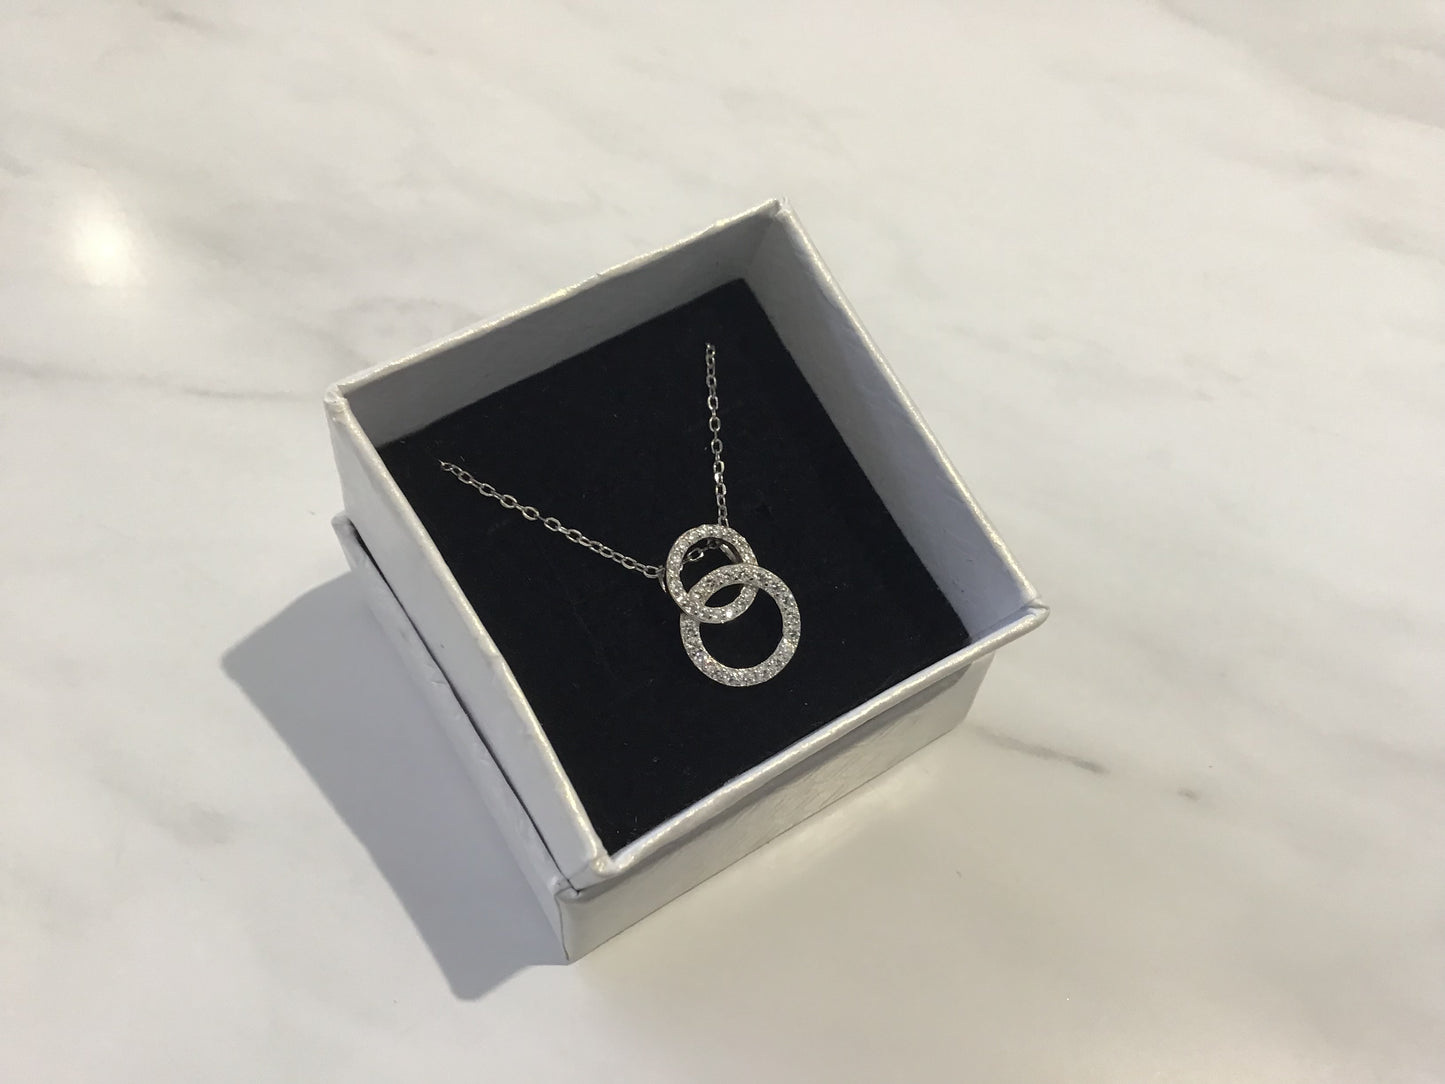 Genuine 925 Sterling Silver Cubic Zirconia Double Ring Pendant with Chain